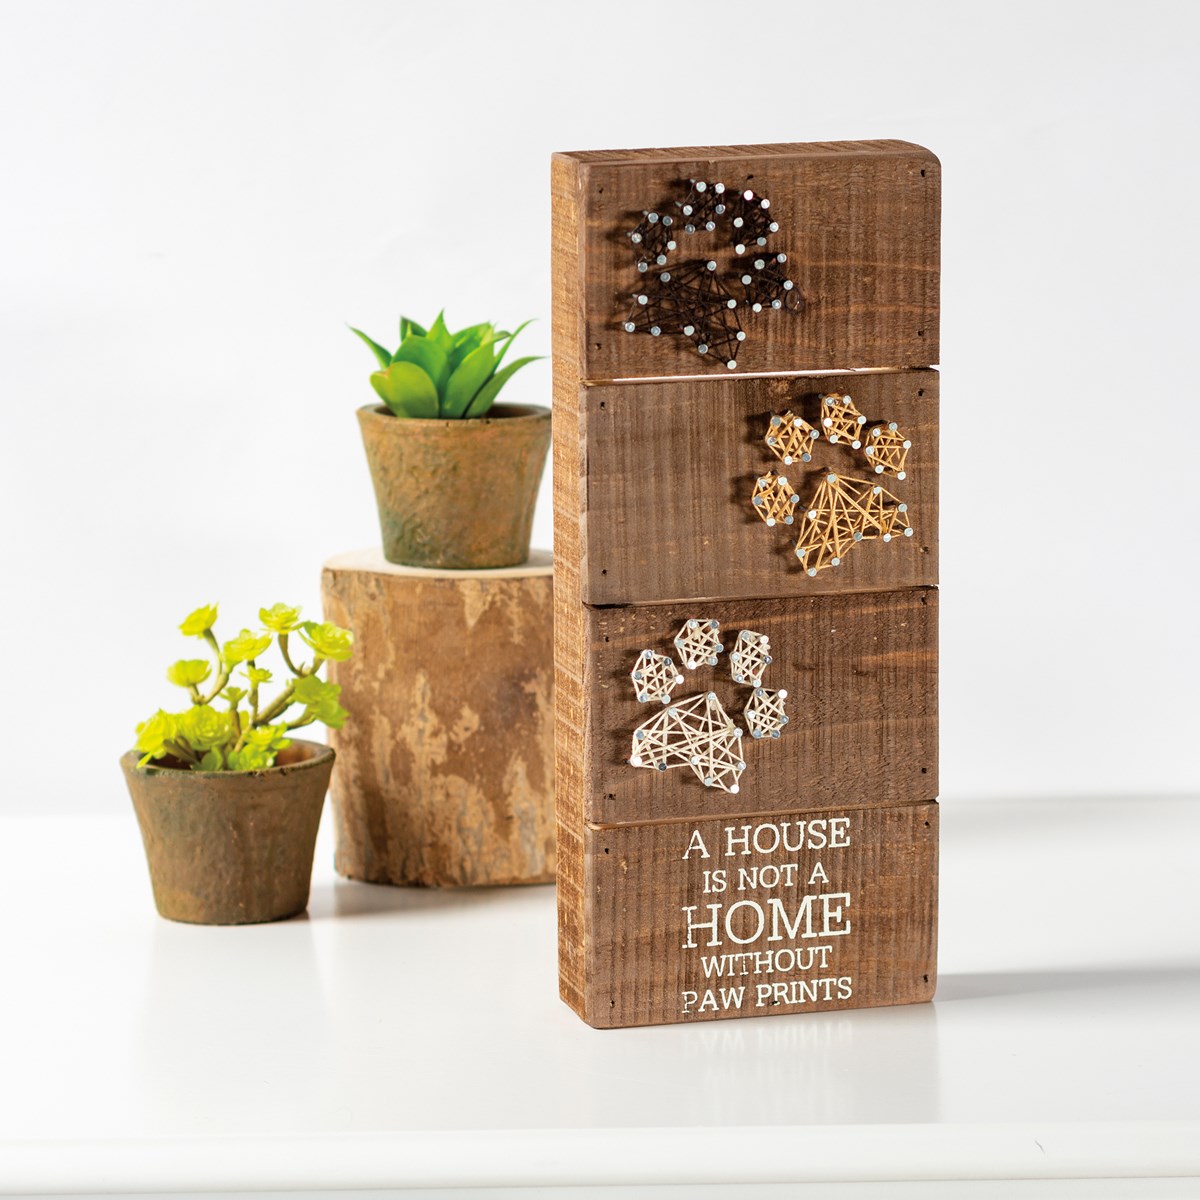 Not A Home Without Paw Prints String Art - Wood, Metal, String 